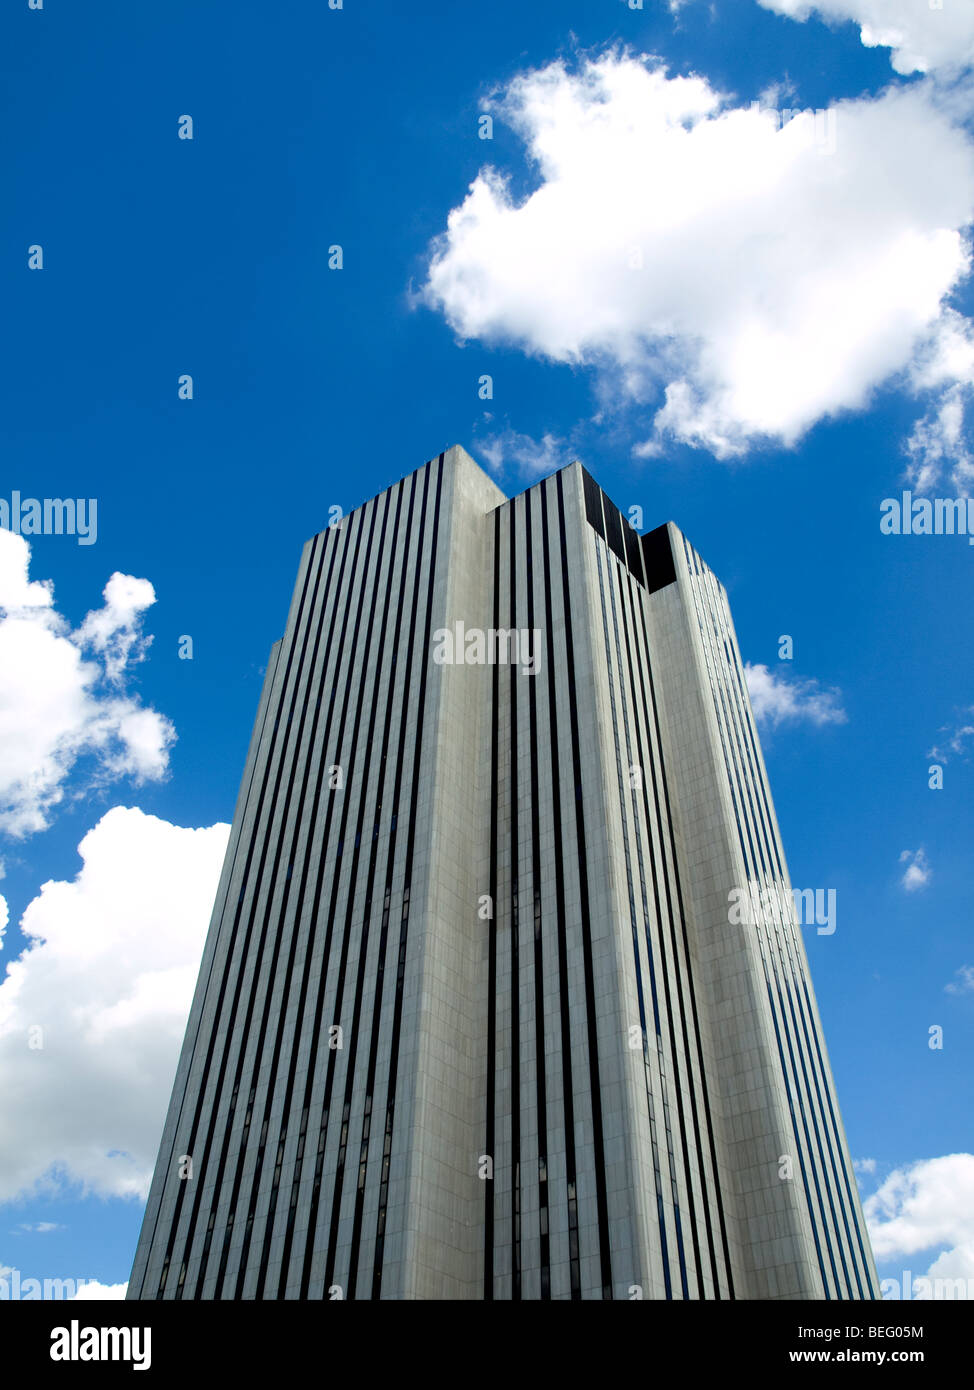 High modern skyscraper on a background of a blue sky and clouds. Stock Photo